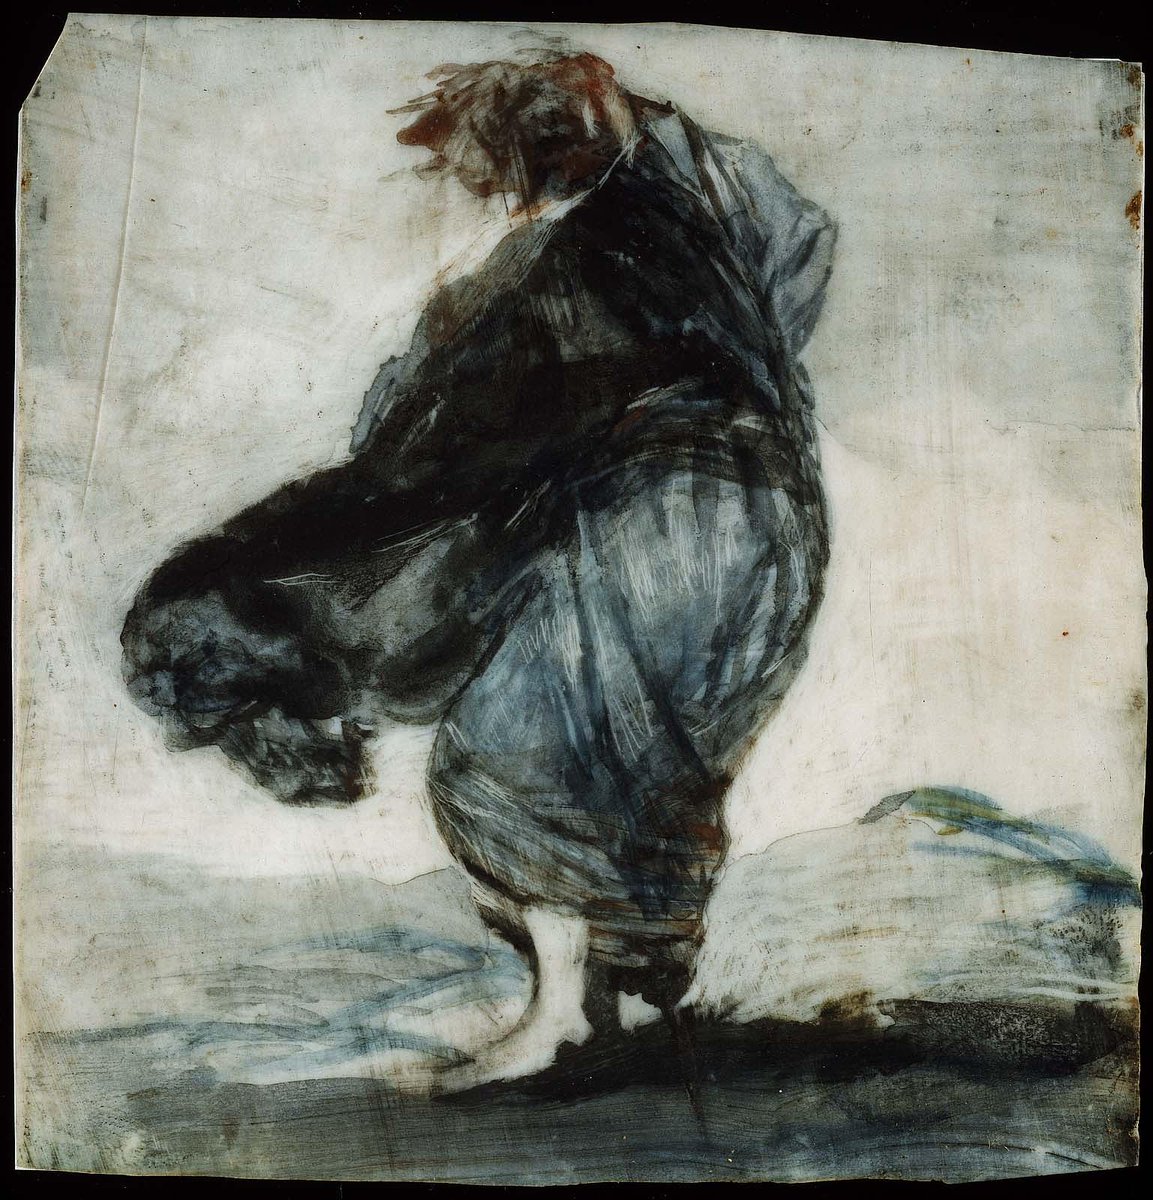 RT @mots_tv: Goya al viento. 'Woman with Clothes Blowing in the Wind', 9x9,5cm @mfaboston https://t.co/J31aTfH4zZ